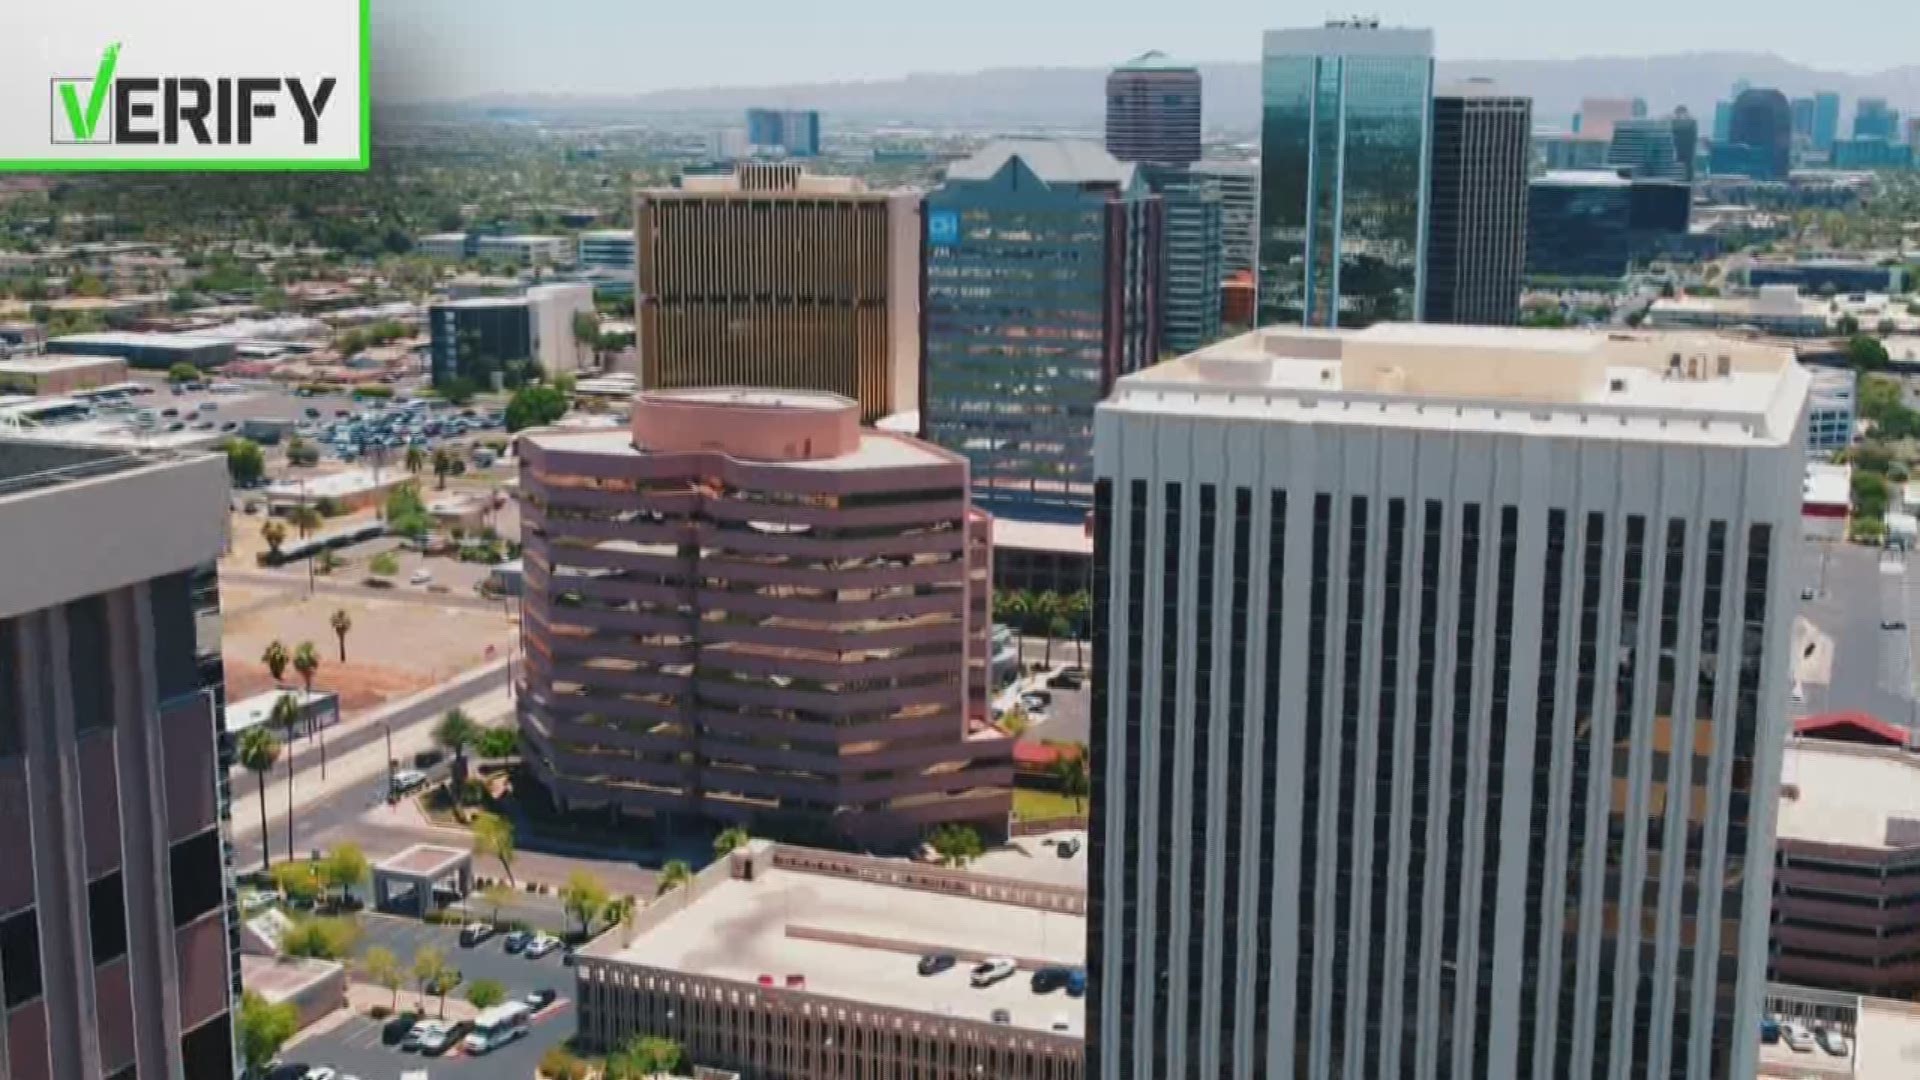 We don't get earthquakes very often in the Valley, if at all. But we definitely felt the building sway Thursday and Friday when two earthquakes rocked Southern California. So, we verify are buildings in Phoenix required to withstand earthquakes?